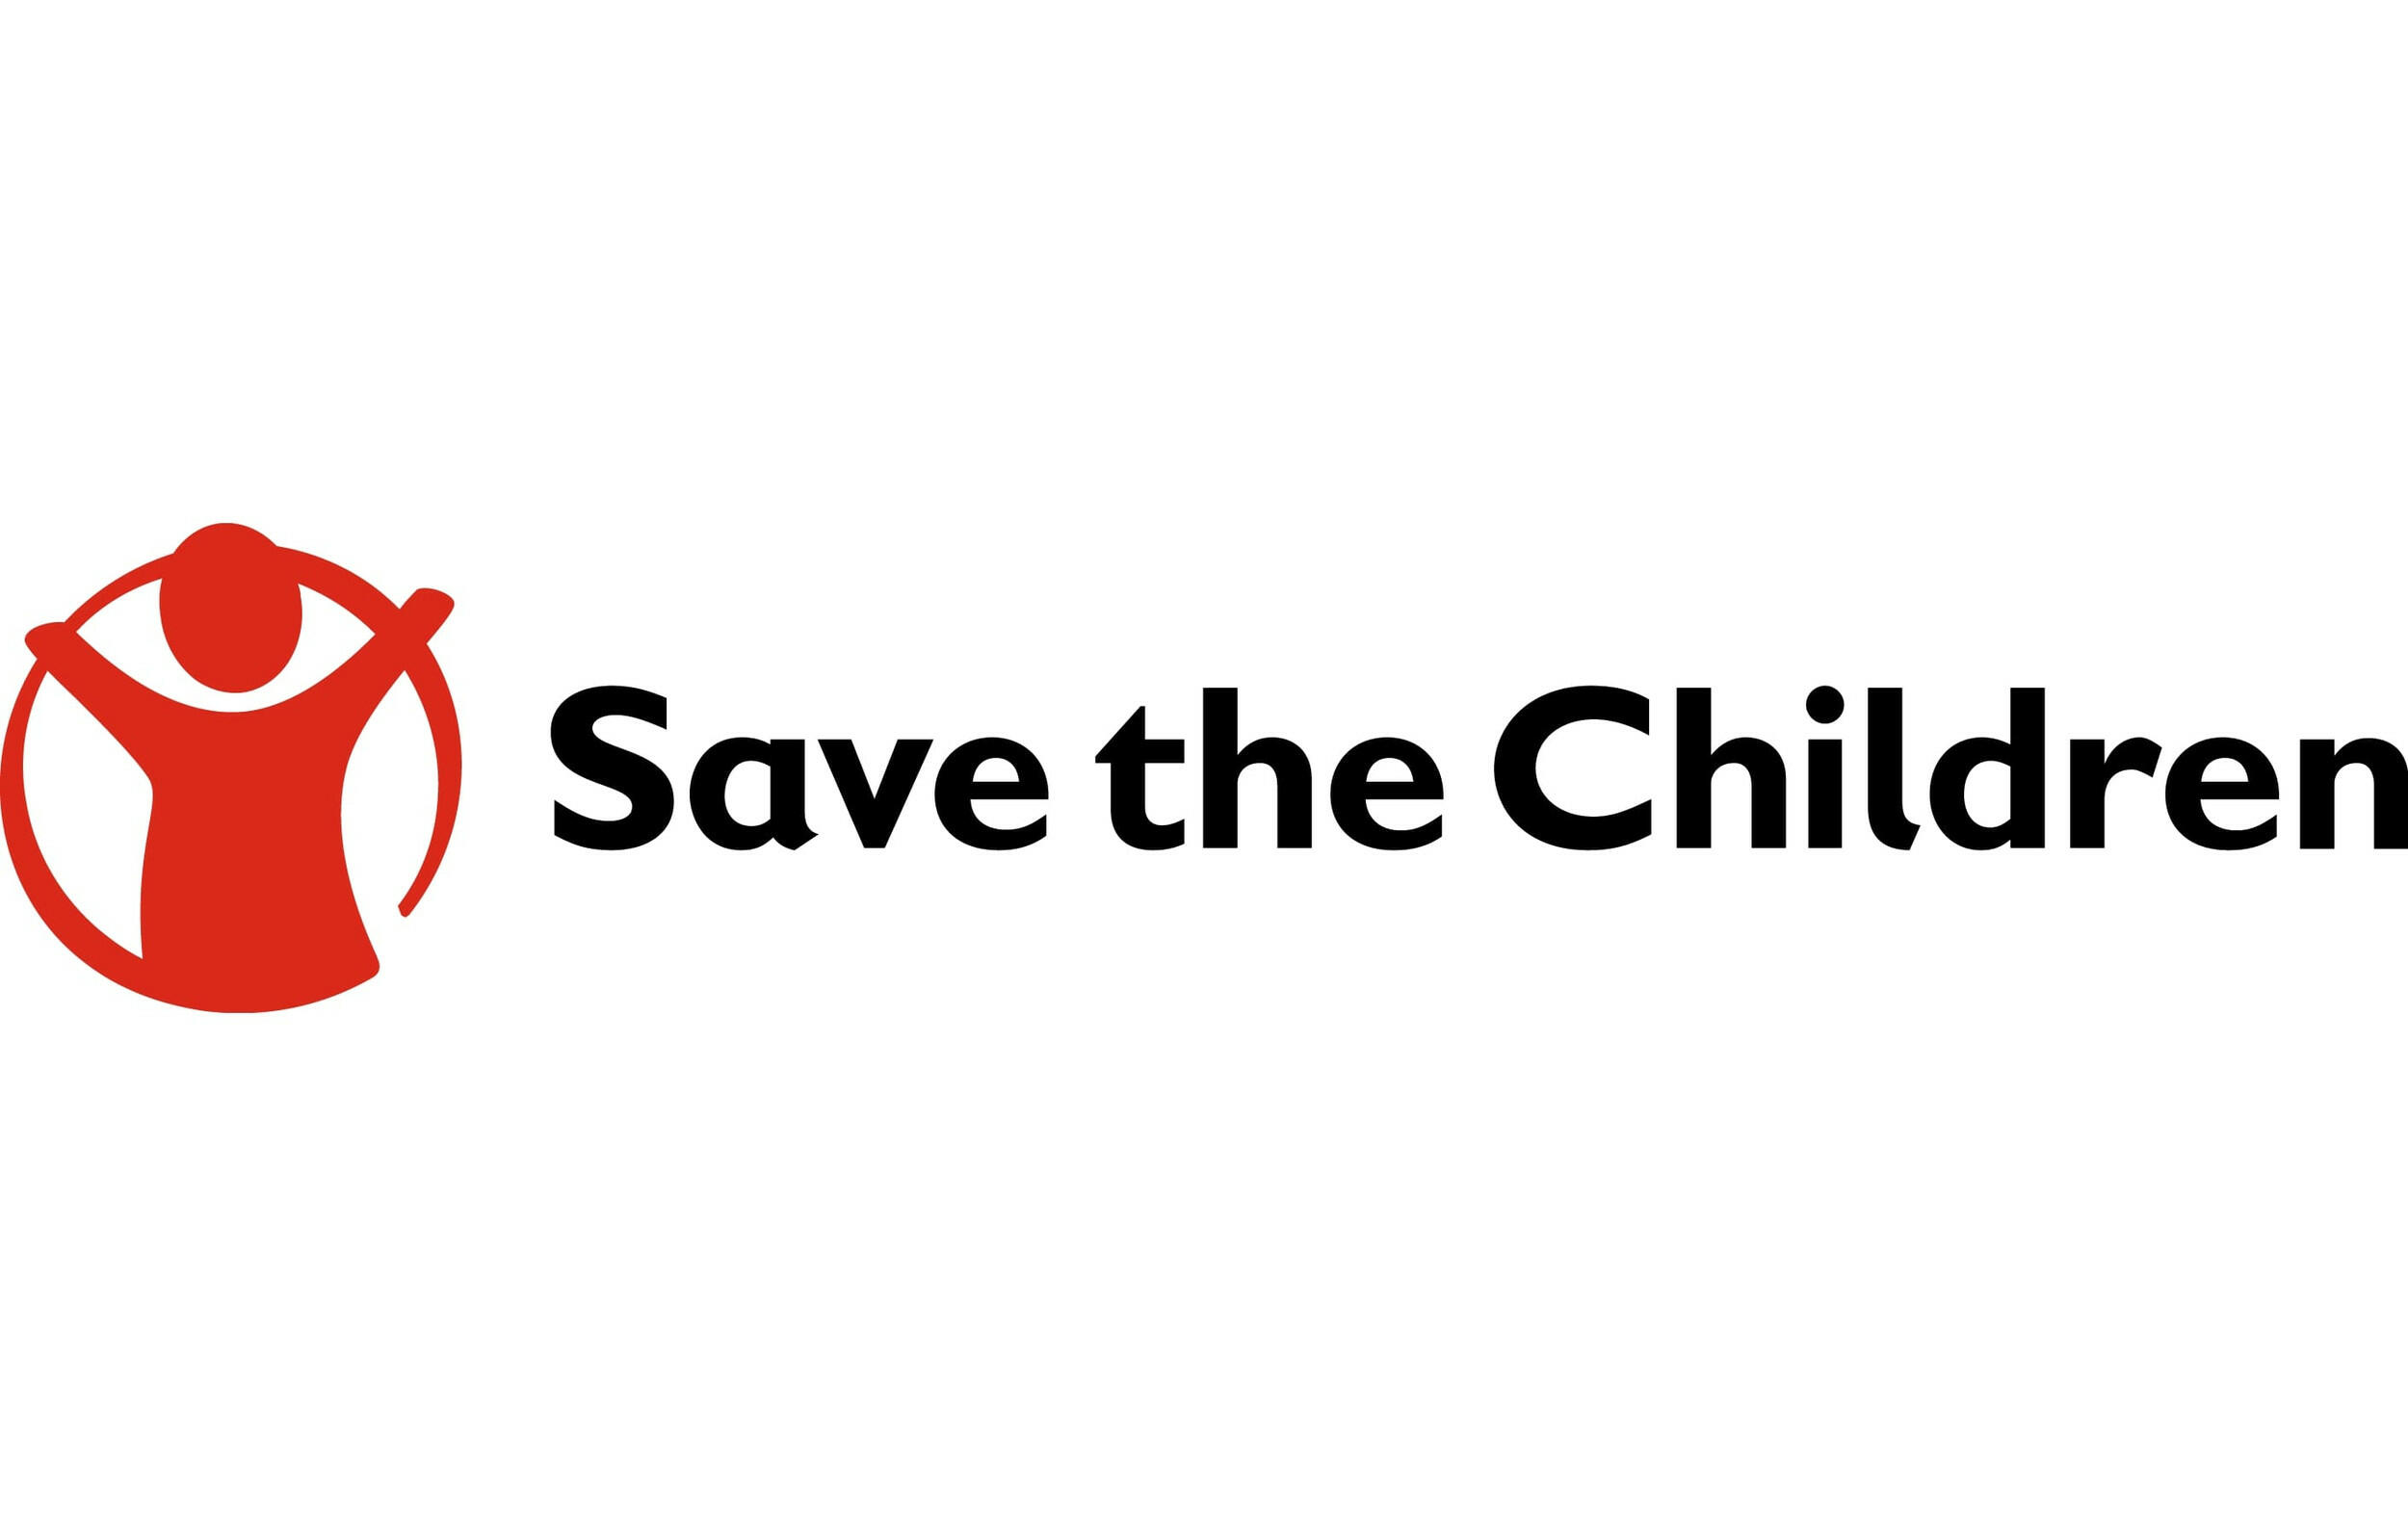 Save the Children has been set up in the United Kingdom since 1919